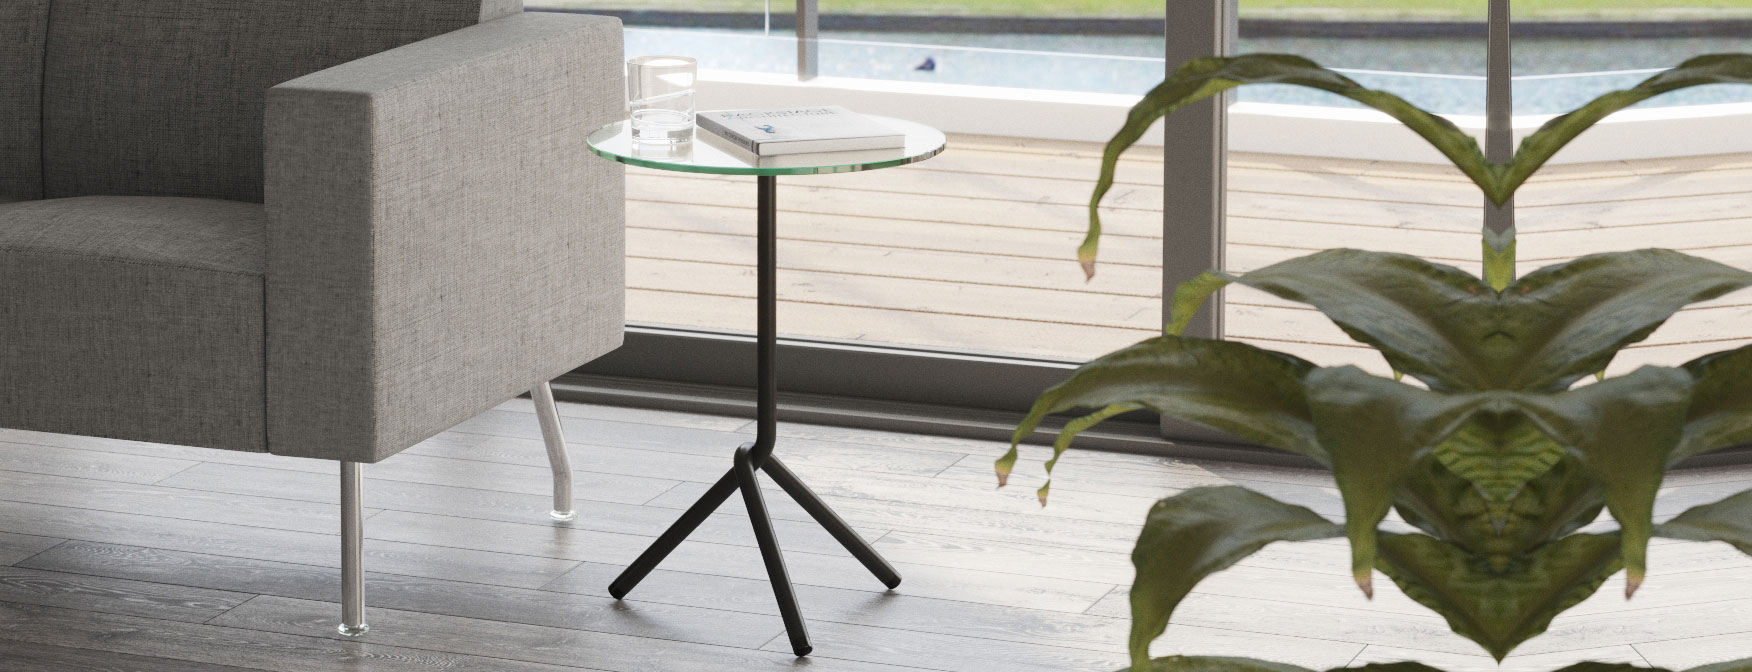 trio side table in glass with virtu sv sofa